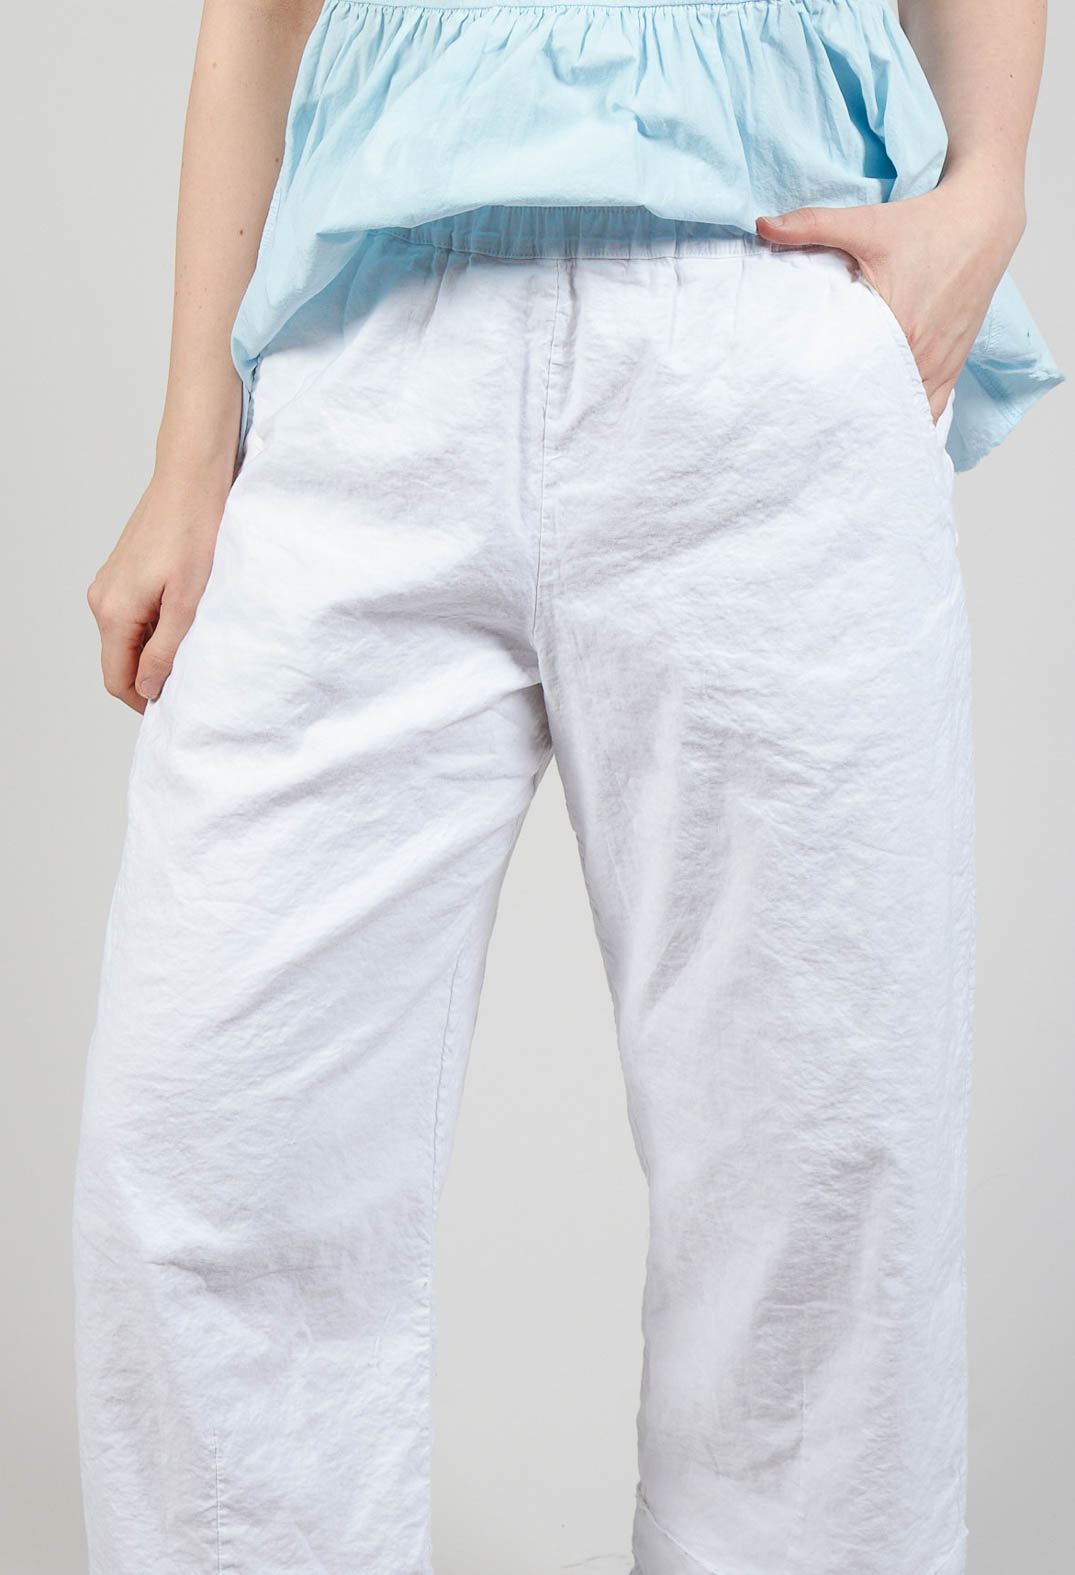 Banded Pants in White